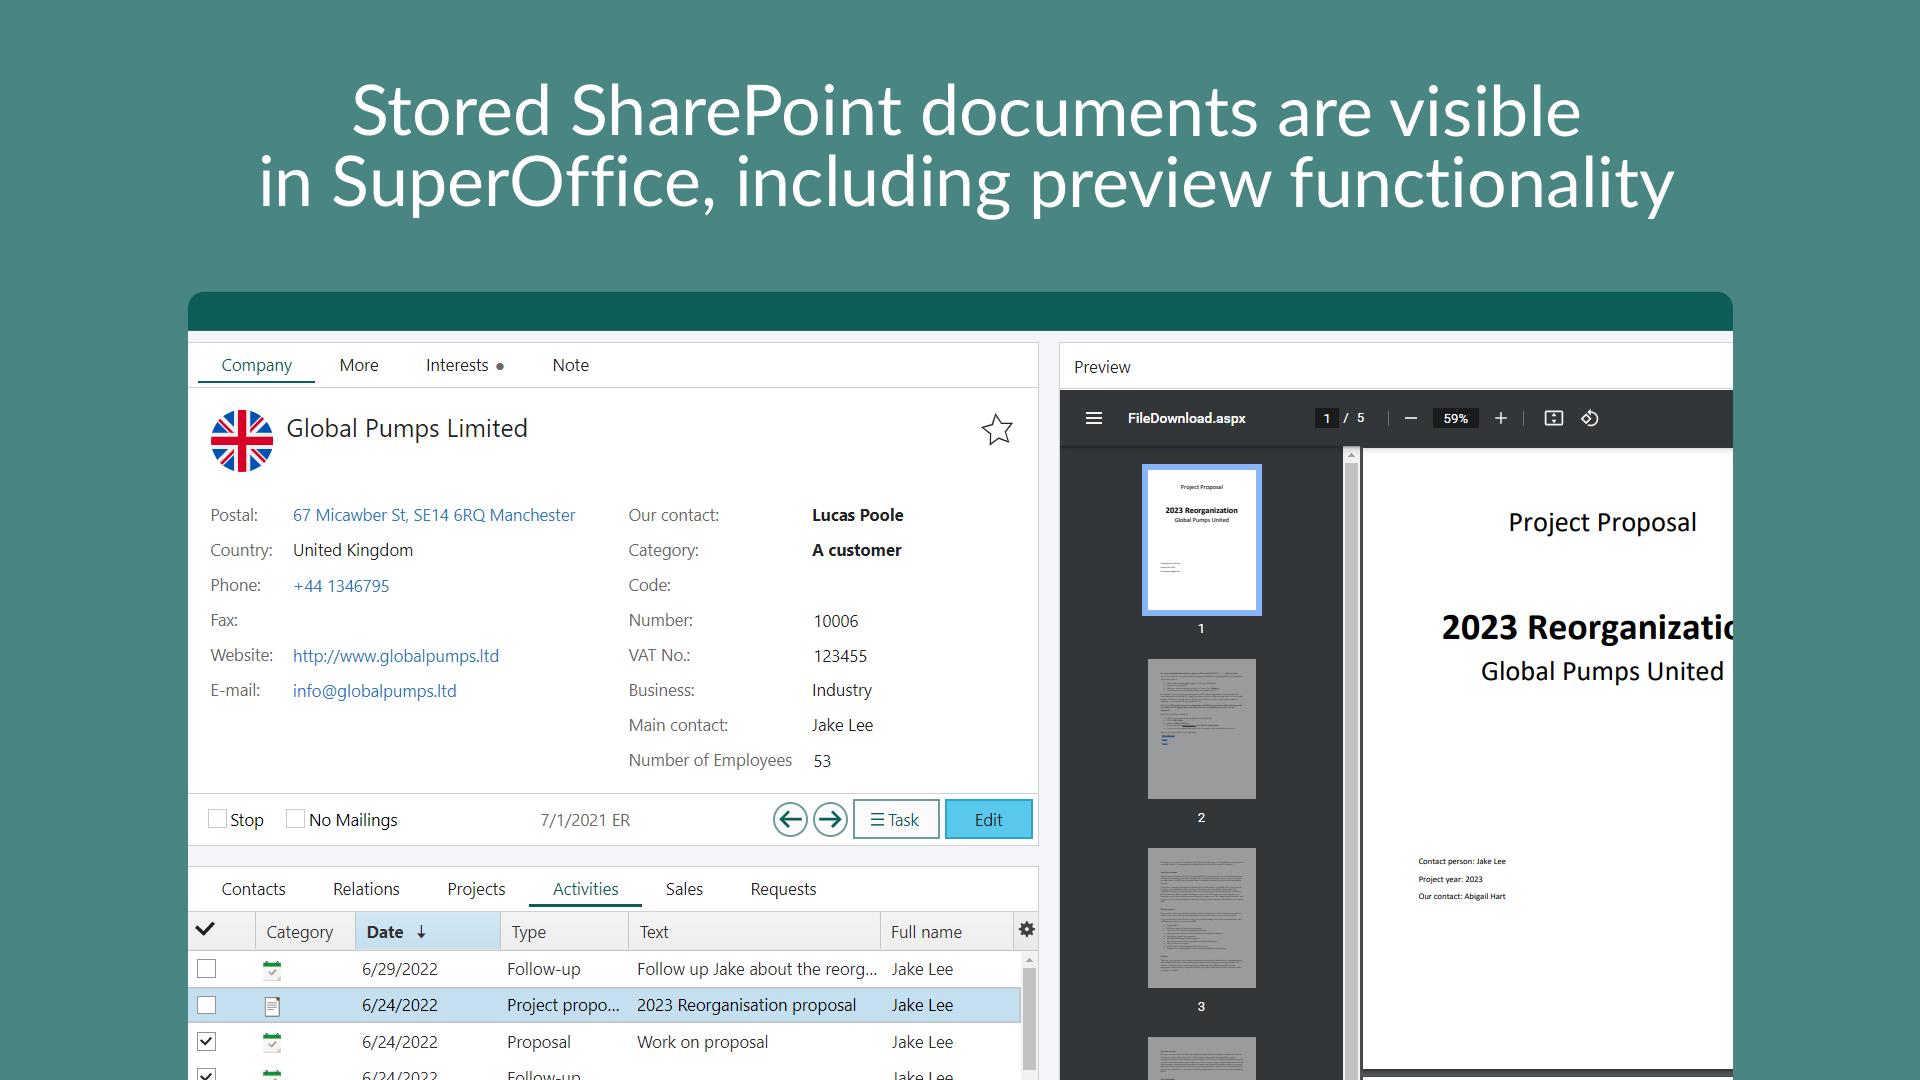 1. Stored SharePoint documents are visible.jpg